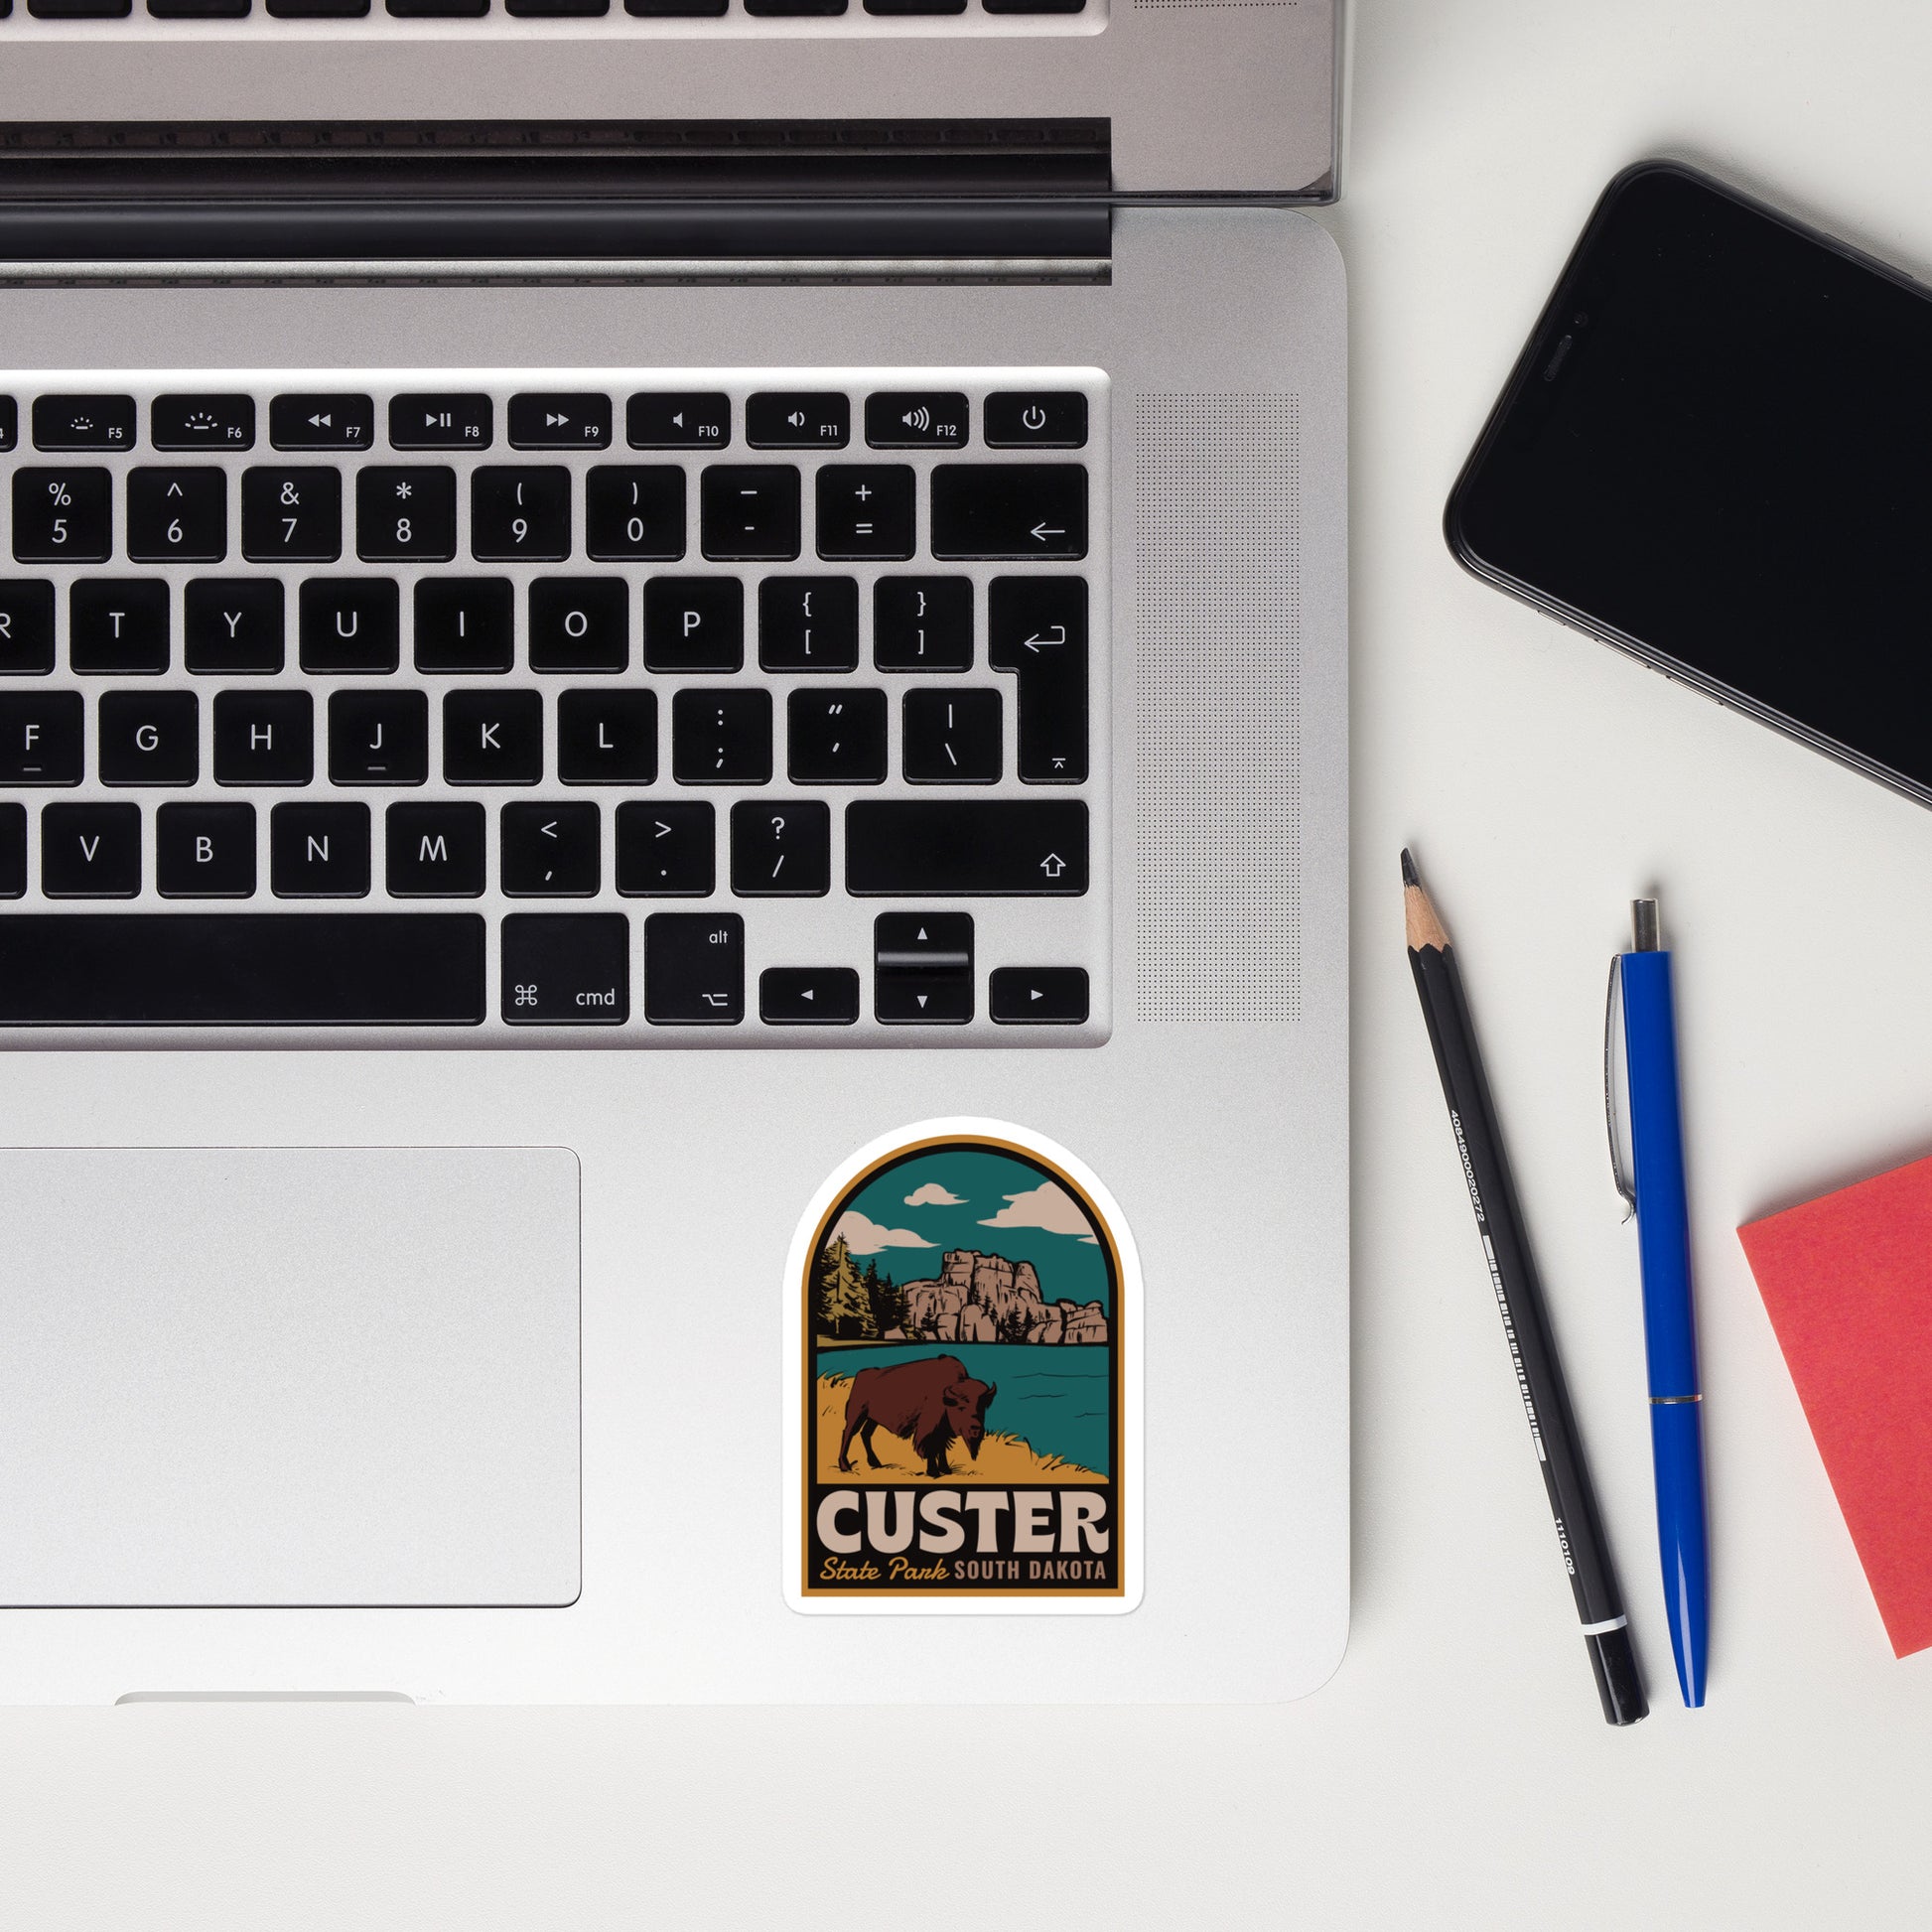 A sticker of Custer State Park on a laptop